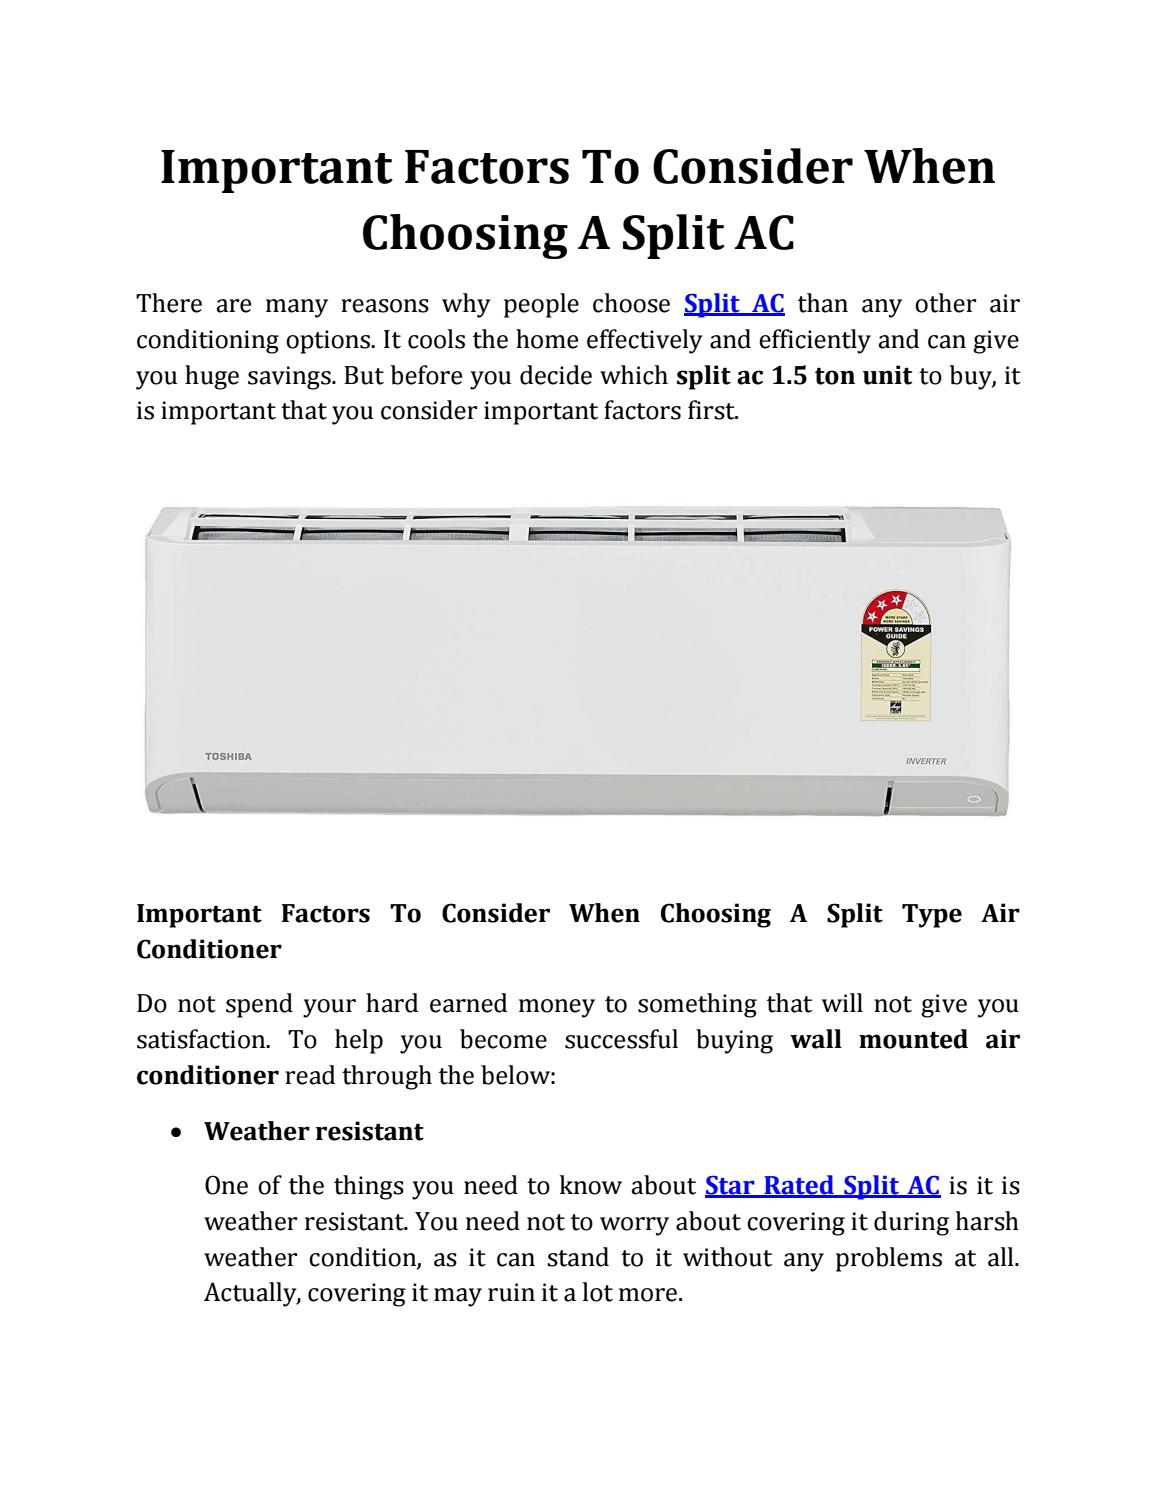 Before you spend your hard earned money
on your next AC unit – read this!